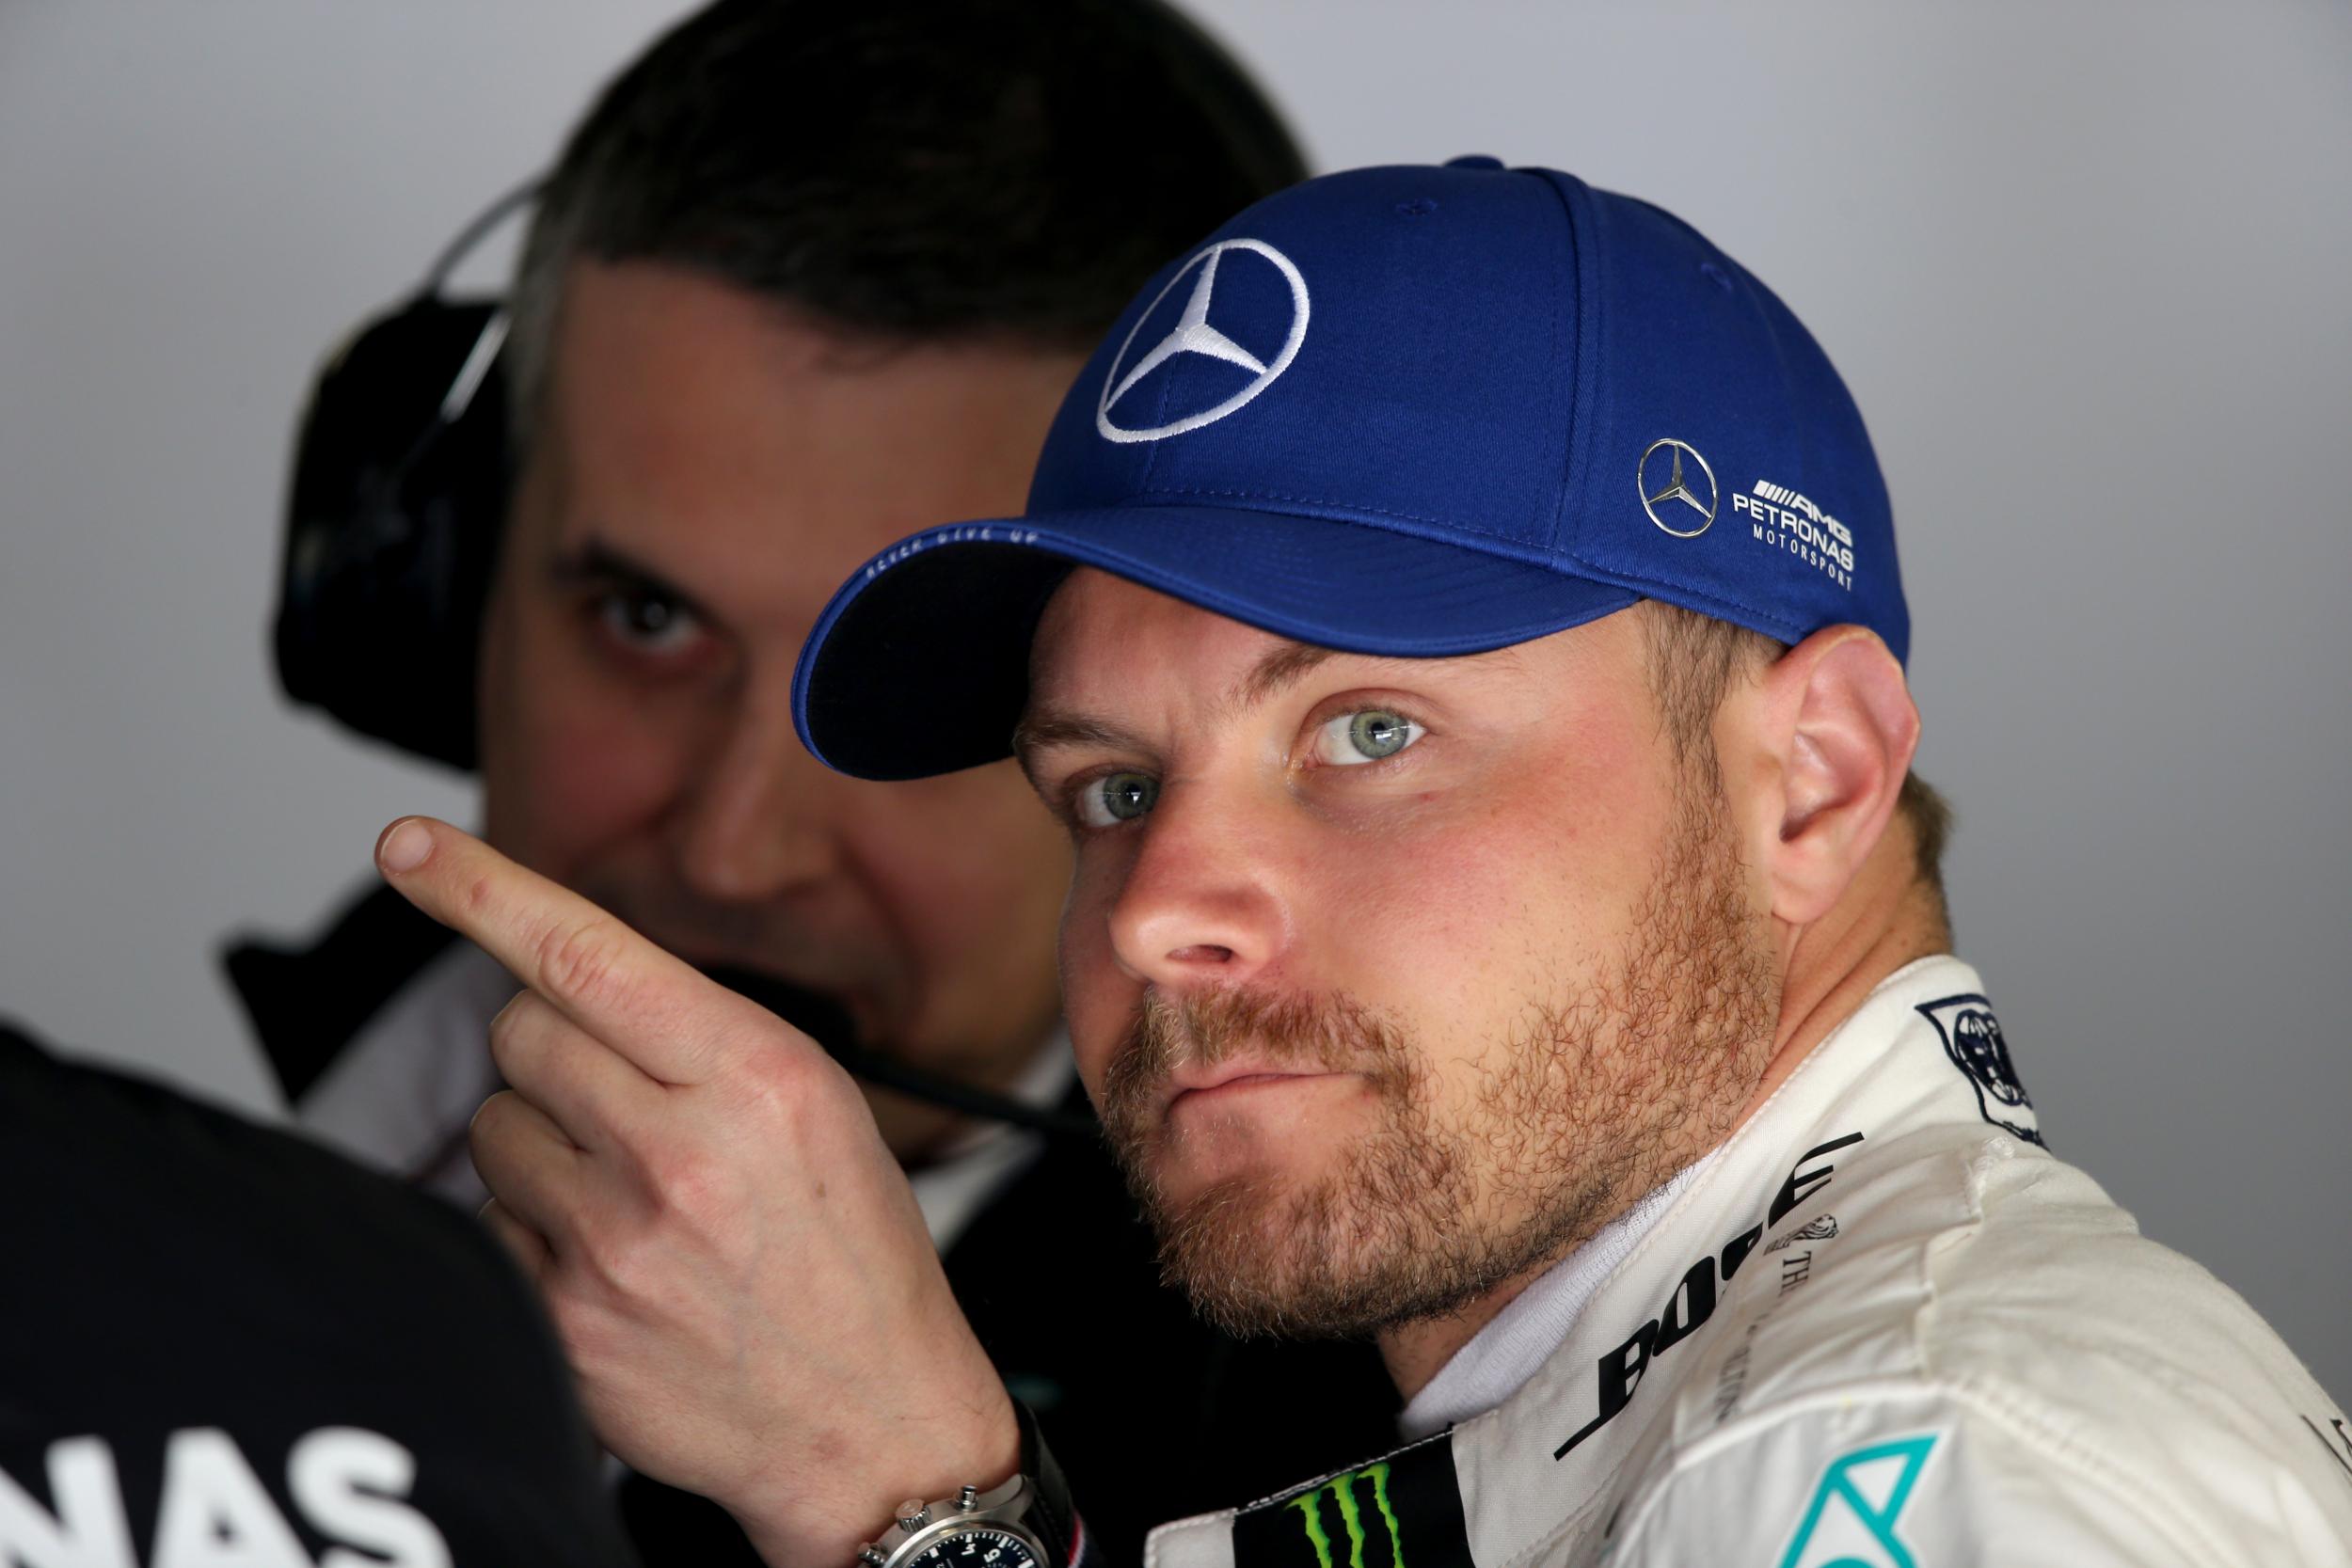 Valtteri Bottas finished top of the timesheets after Friday practice (Getty)